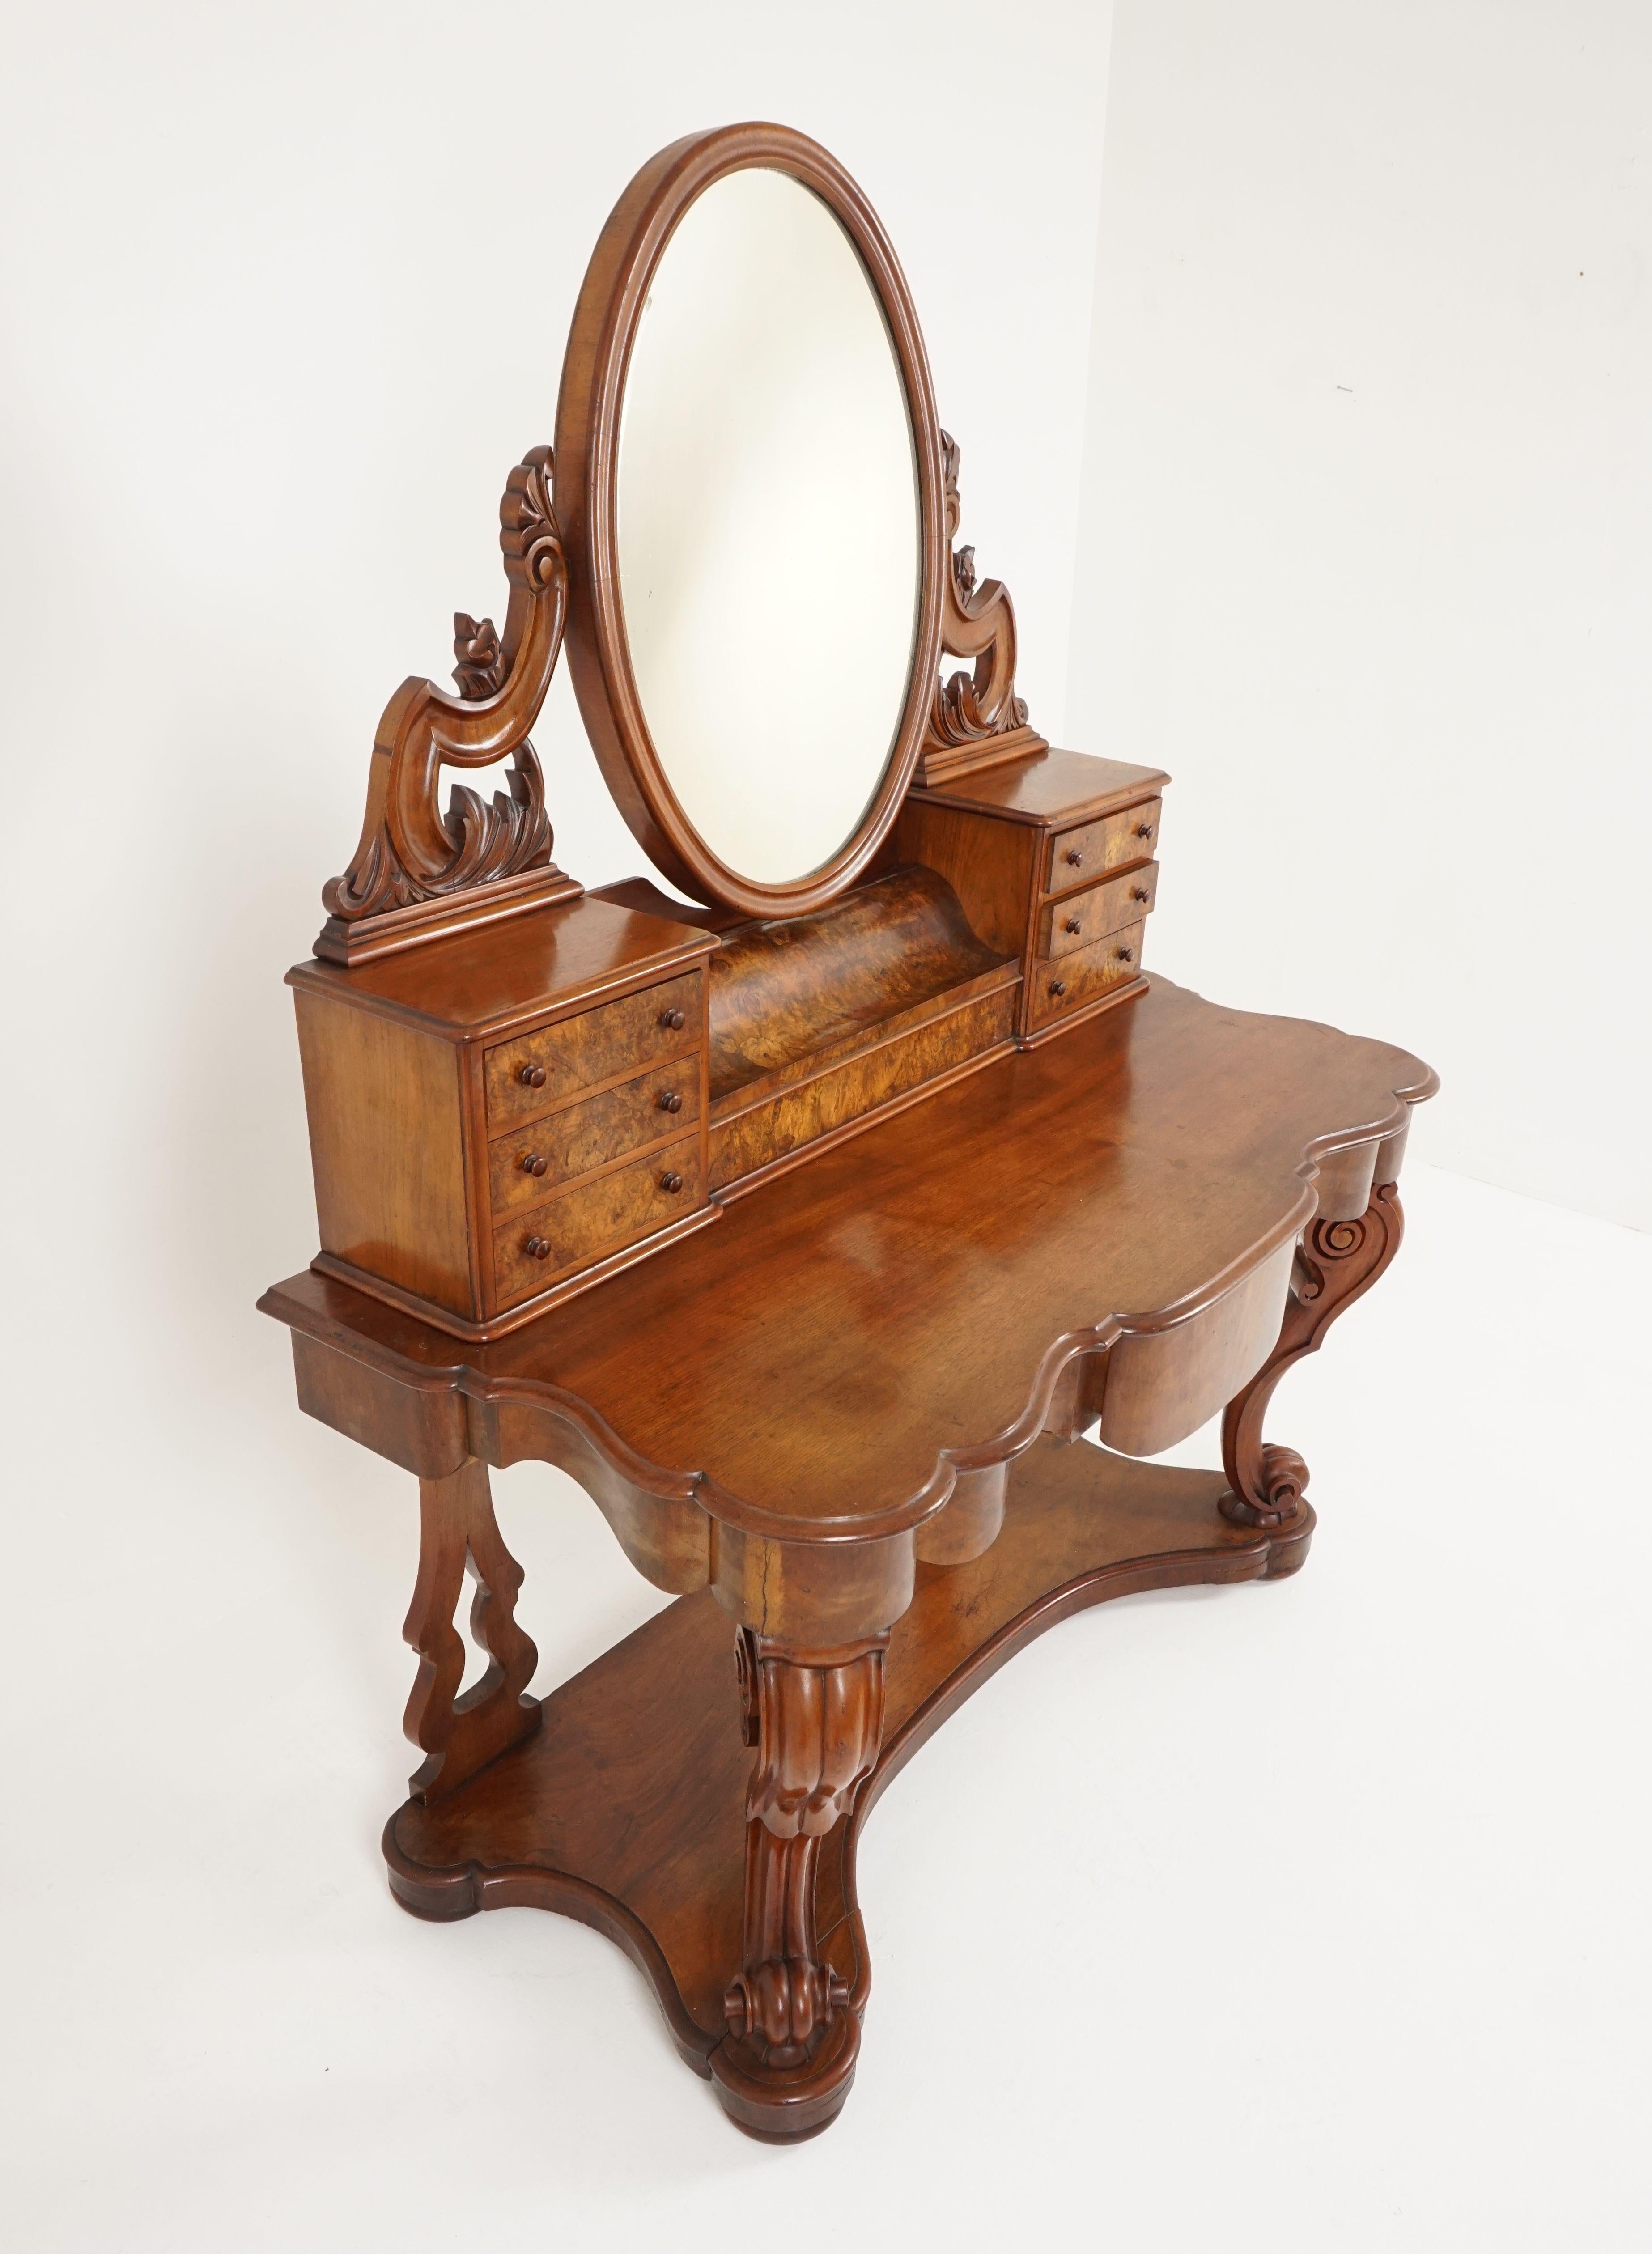 Antique Victorian burr walnut vanity dressing table, Duchess dresser, Scotland, 1870, B2125

Scotland 1870
Solid walnut and veneer
Original finish
The table top has a removeable and tiltable mirror held in place with crisp carved